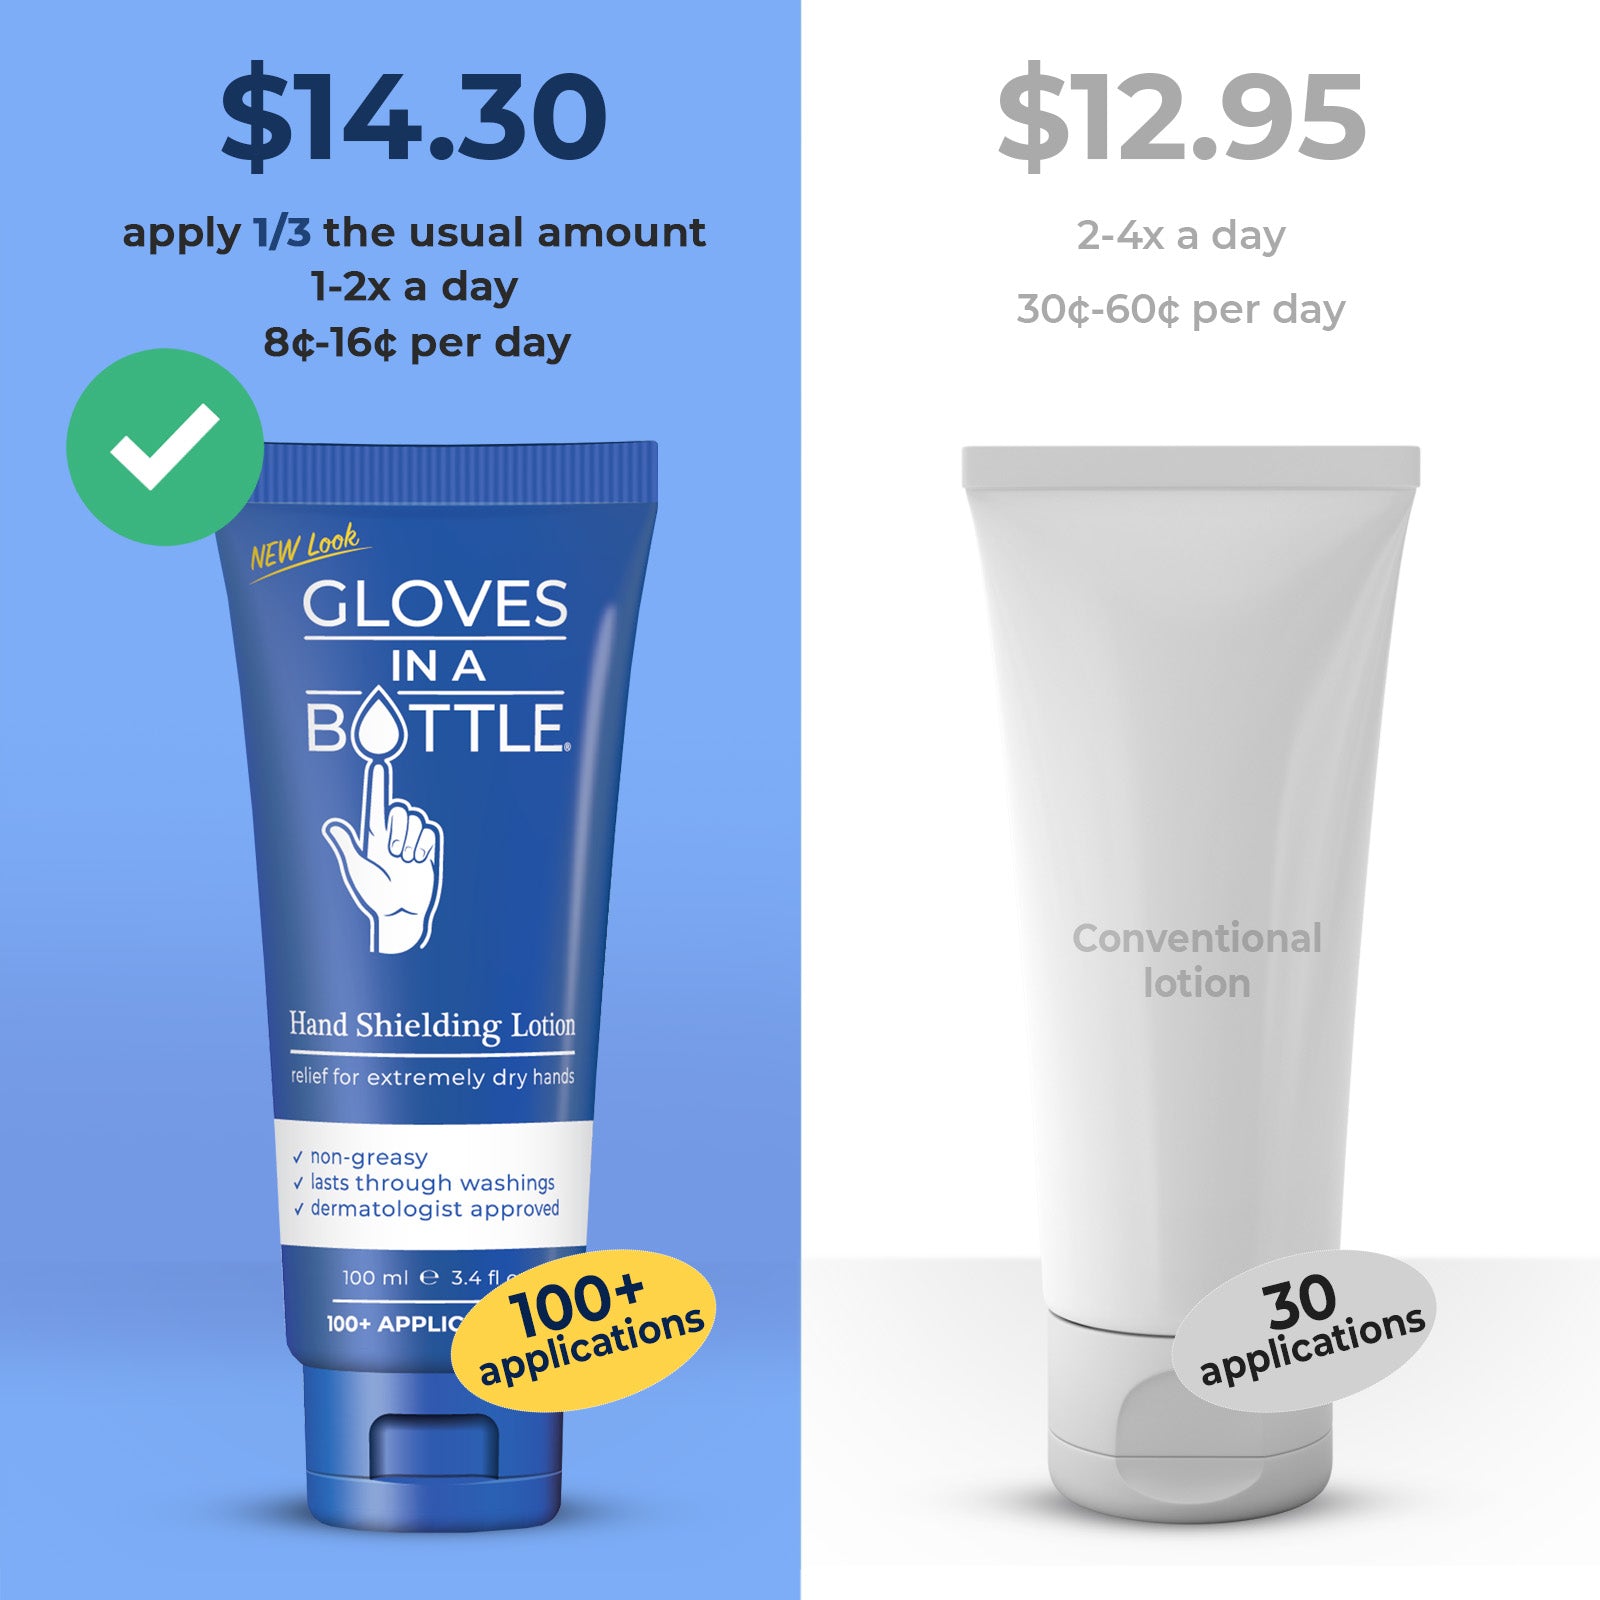 Gloves In A Bottle –  Hand Shielding Lotion for Dry Skin, Hand Lotion Travel Size – 3.4 oz